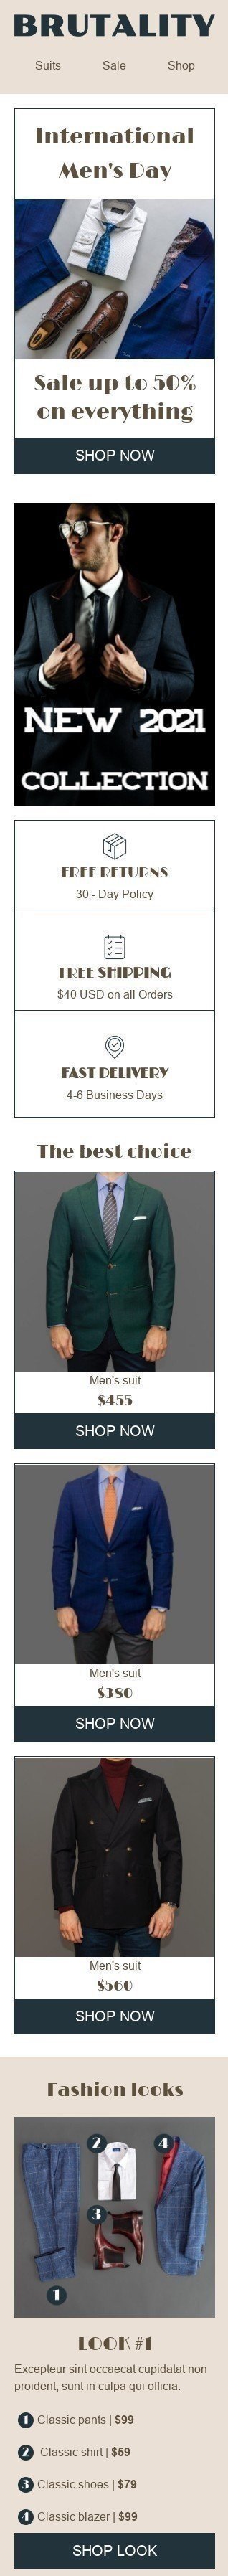 International Men's Day Email Template «Men's suits» for Fashion industry mobile view